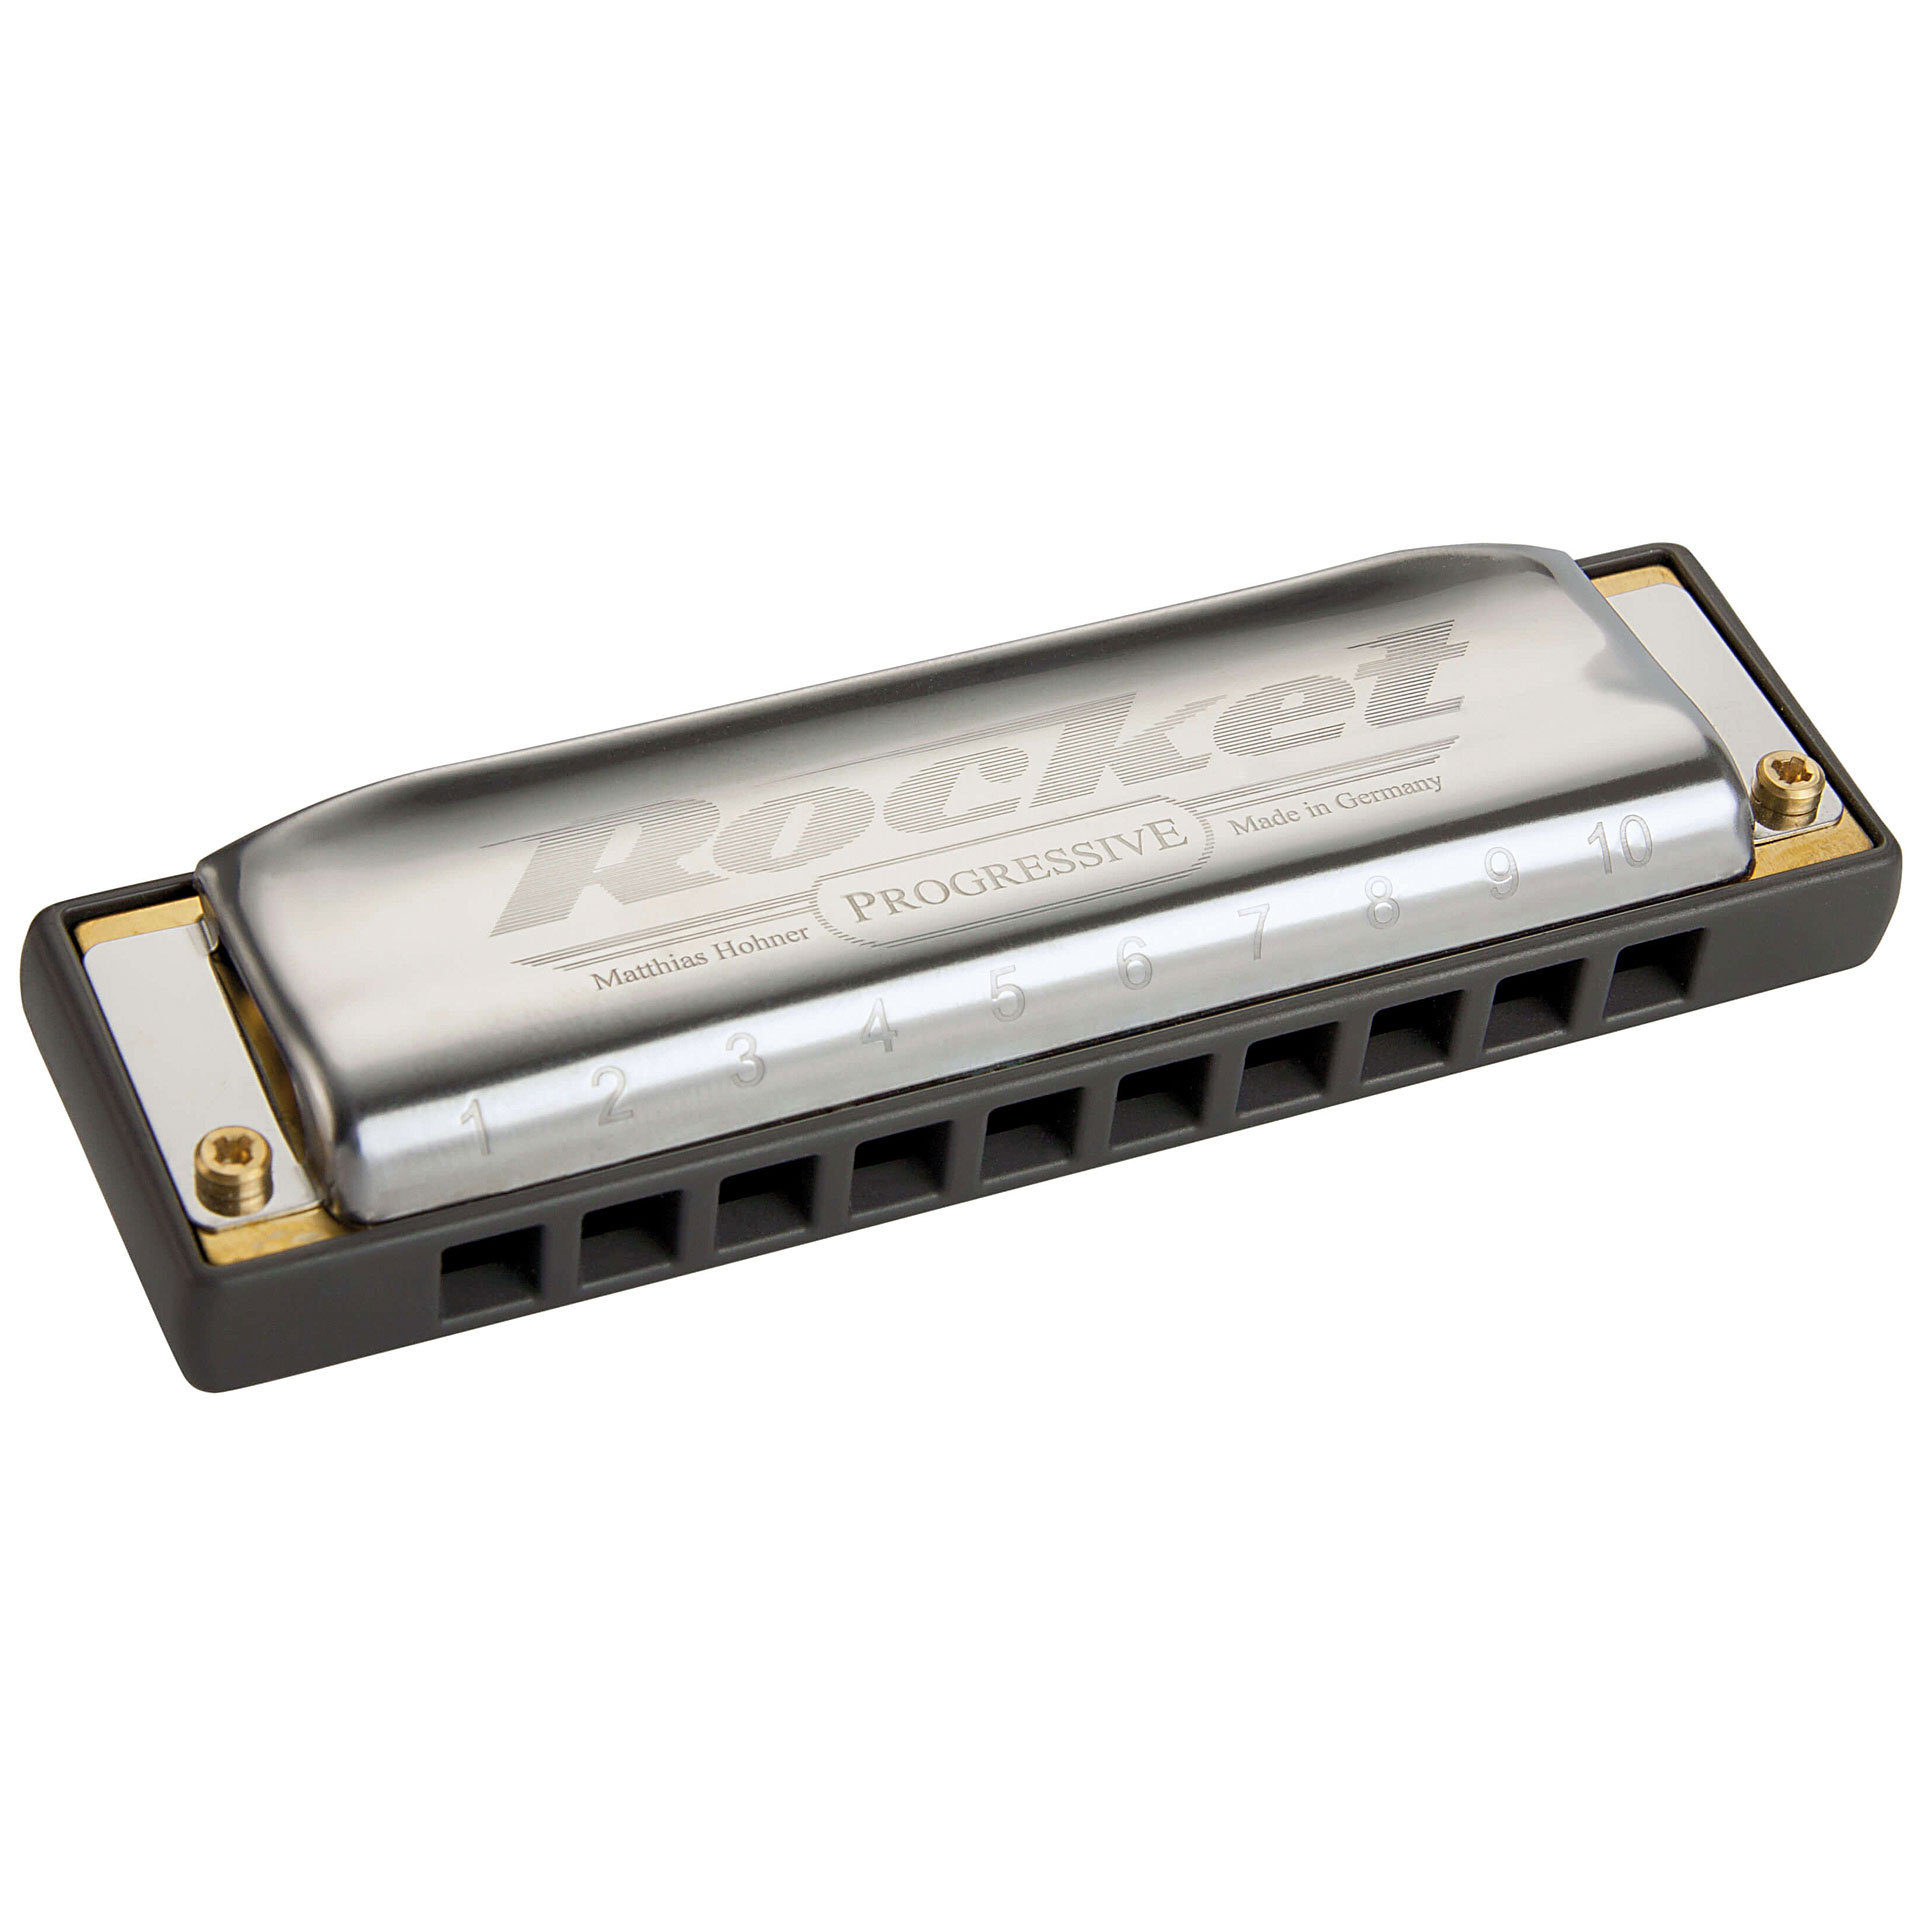 Harmonica: Hohner Rocket, The Richter-Tuned Harmonica, A Variety Of Diatonic Type, Rocket, Made In Germany, Matthias Hohner. 1920x1920 HD Wallpaper.